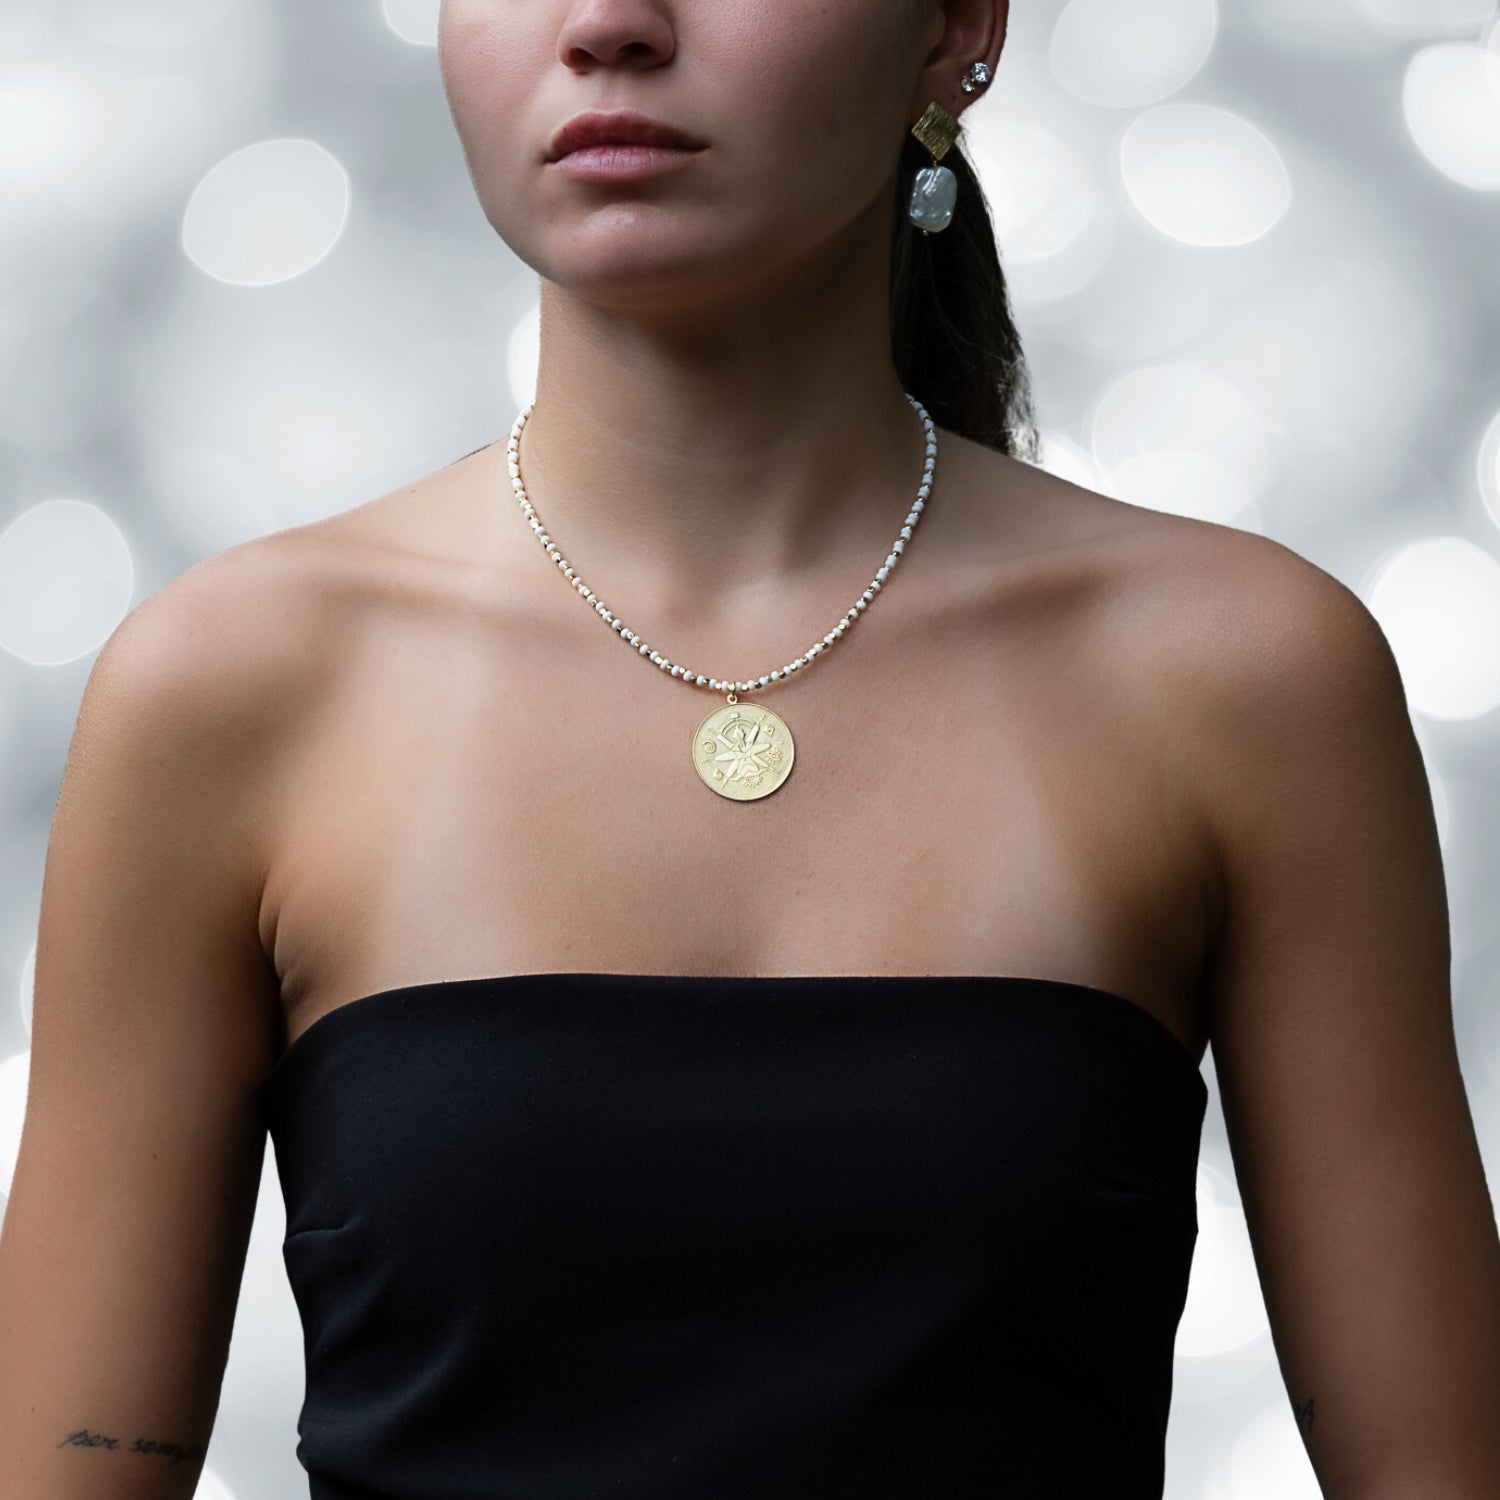 Necklace of Hope - Model Embracing New Beginnings.